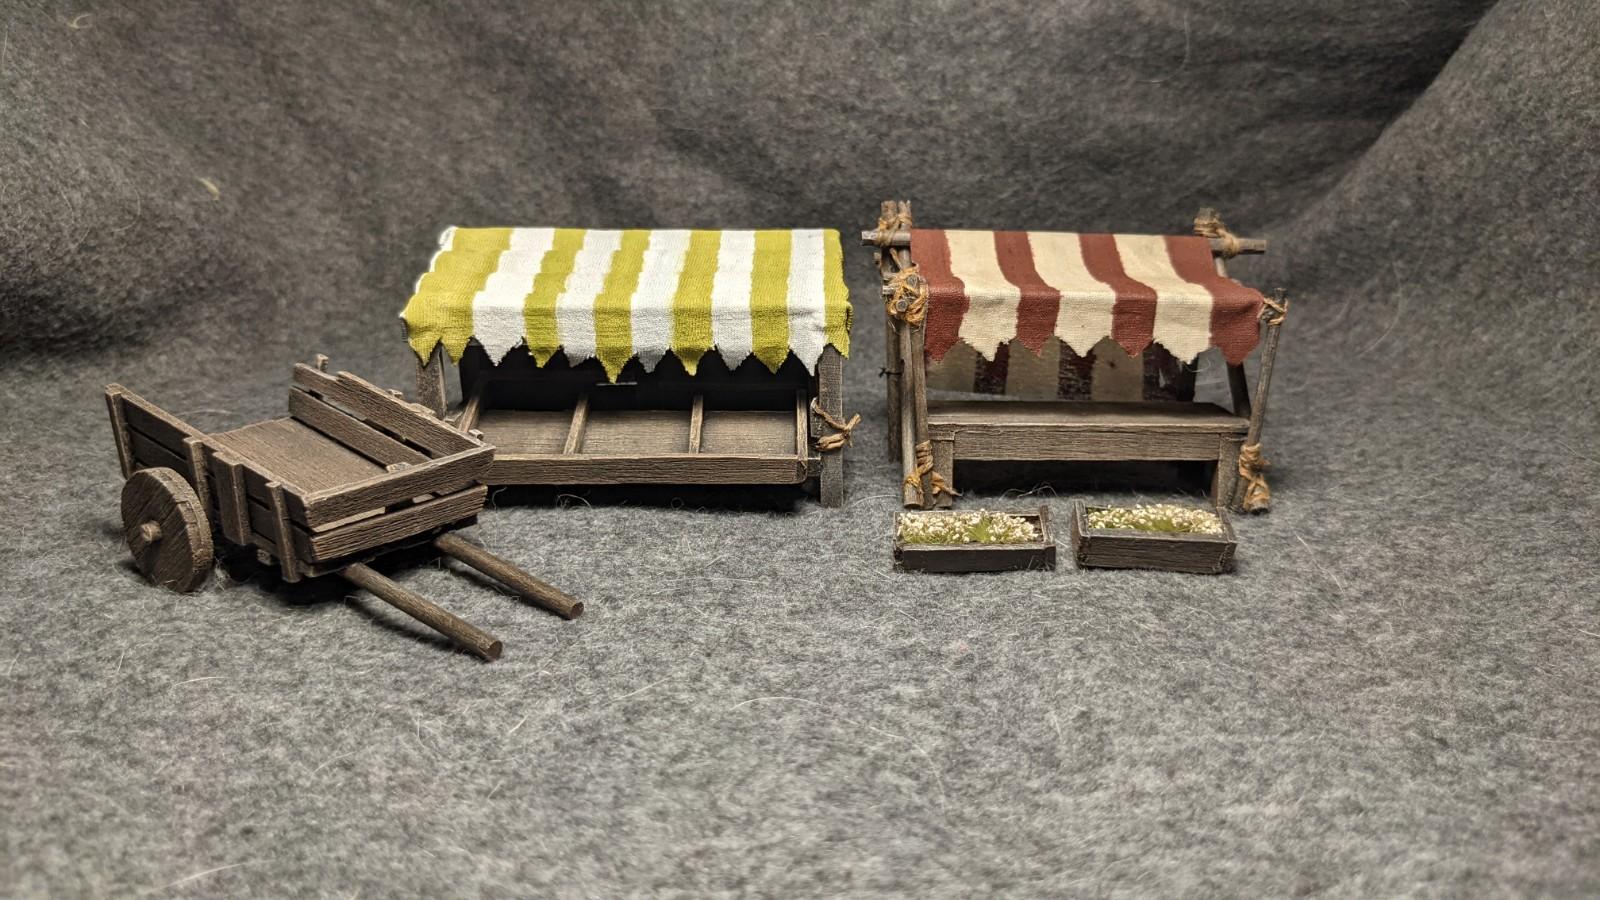 Balsa, Crafting, Dungeons And Dragons, Market, Terrain